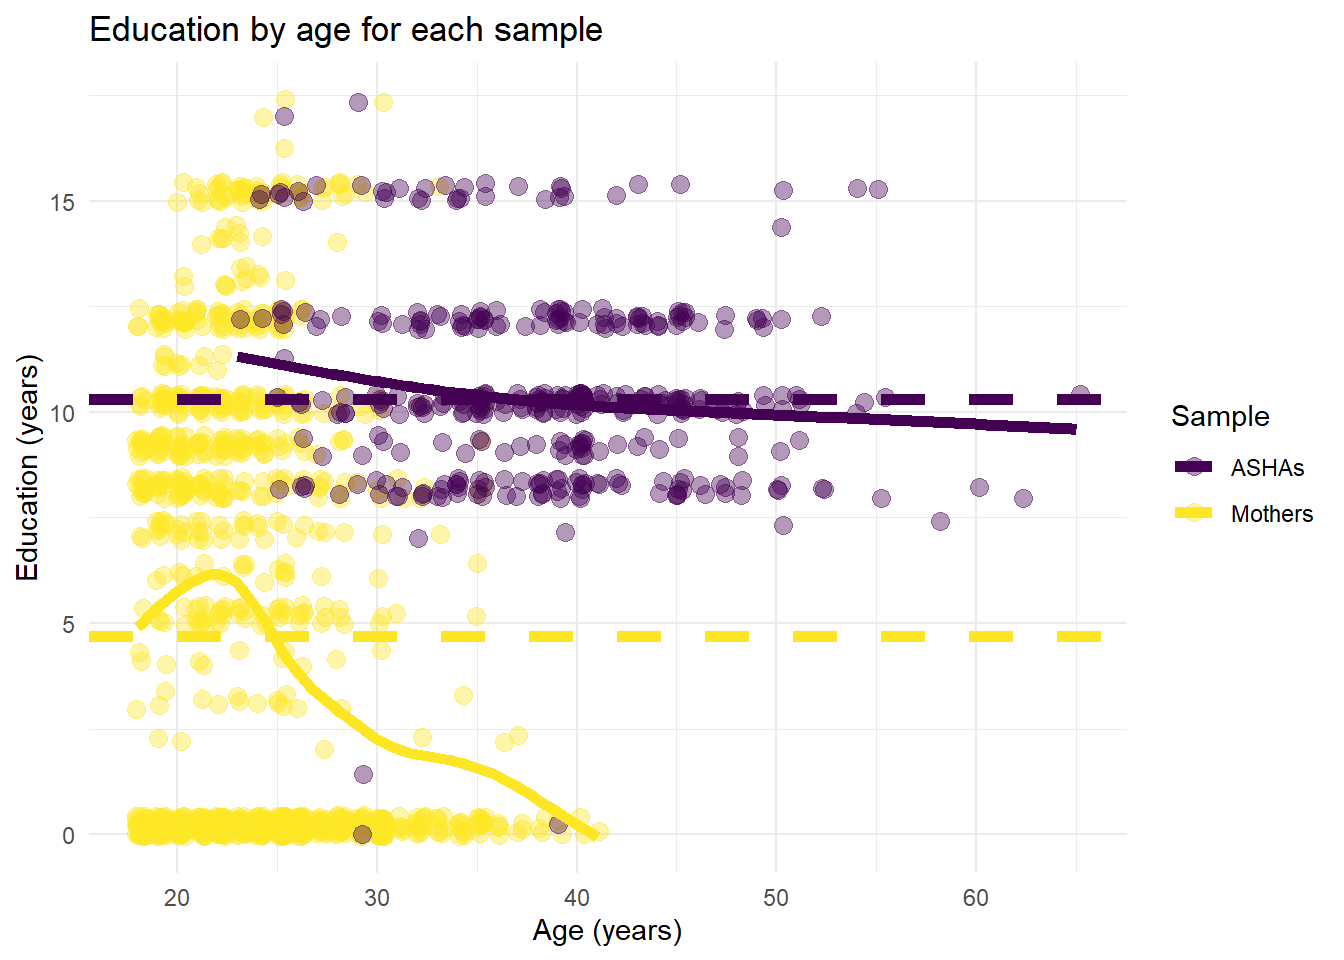 Education by age comparing Mother and ASHA samples. The dotted lines are sample mean.